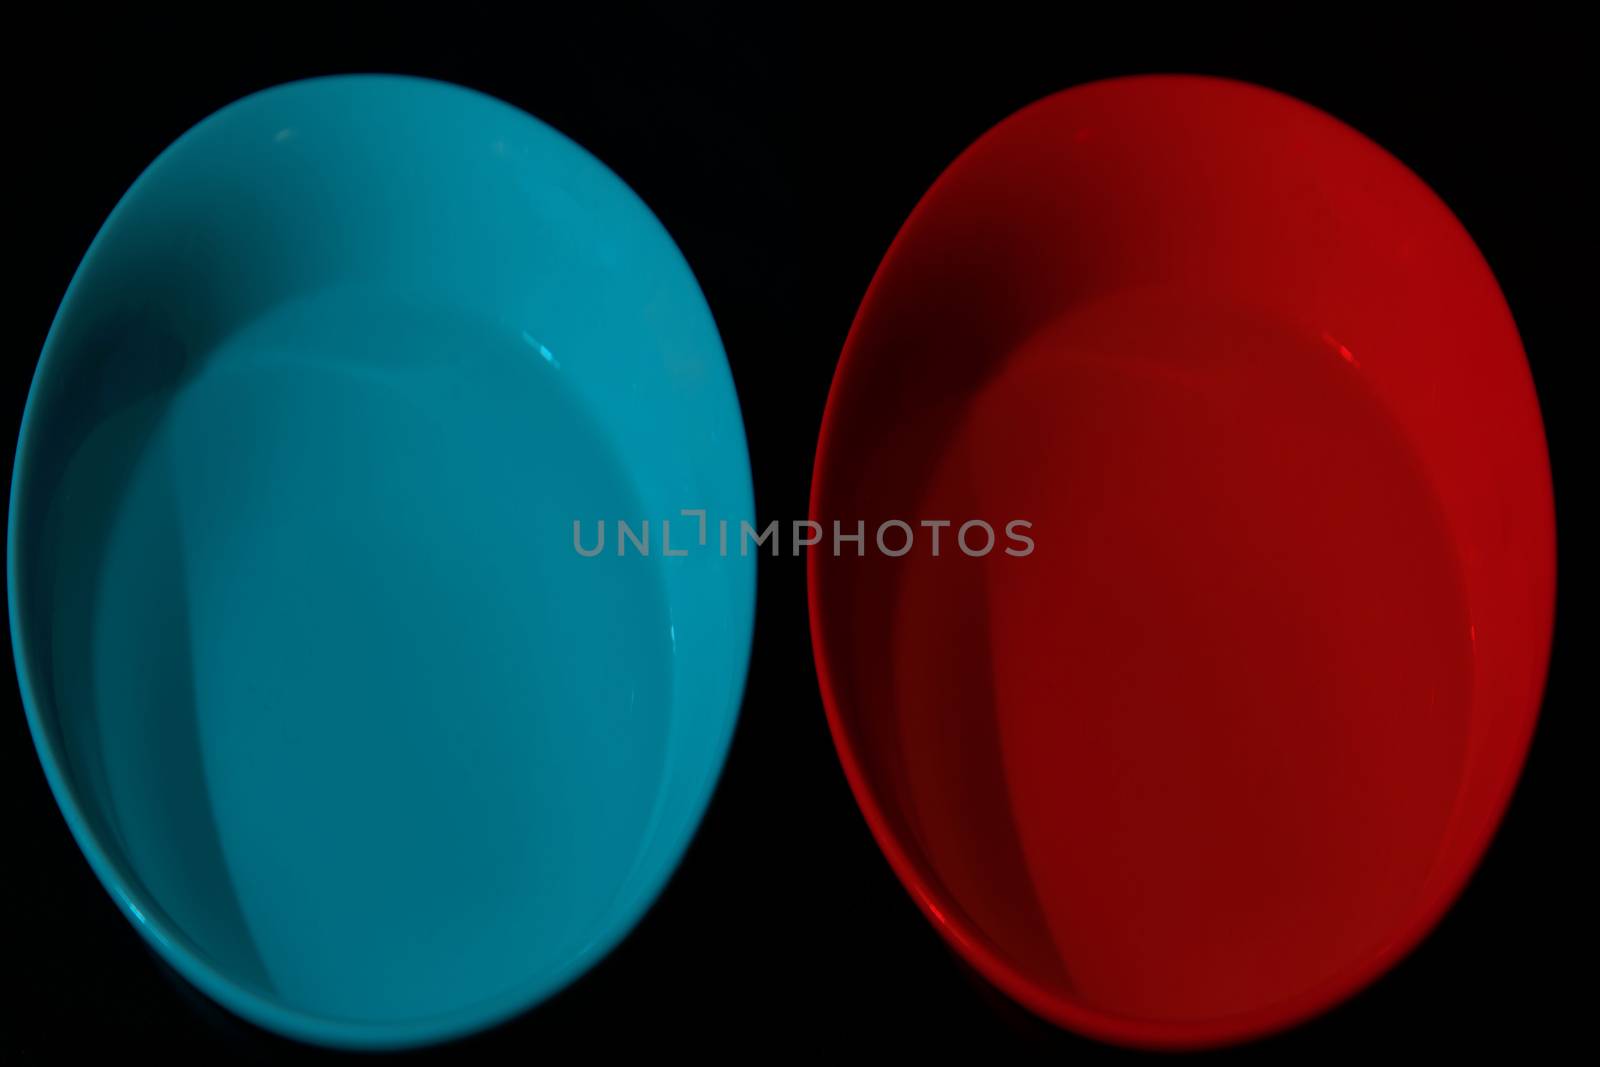 Two bowls with water of different colors, by raul_ruiz